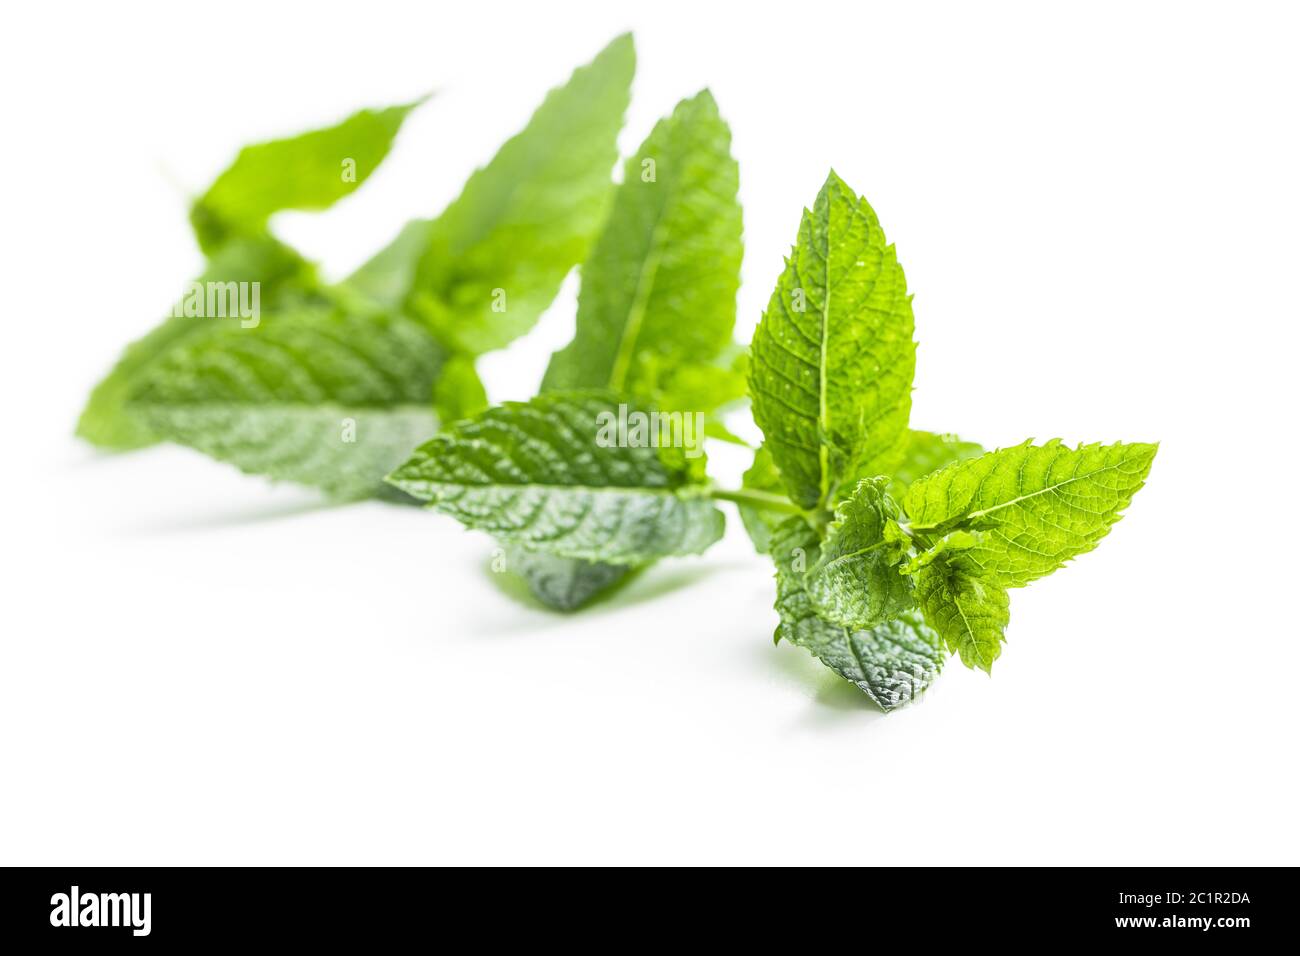 Green mint branch isolated on white background. Stock Photo